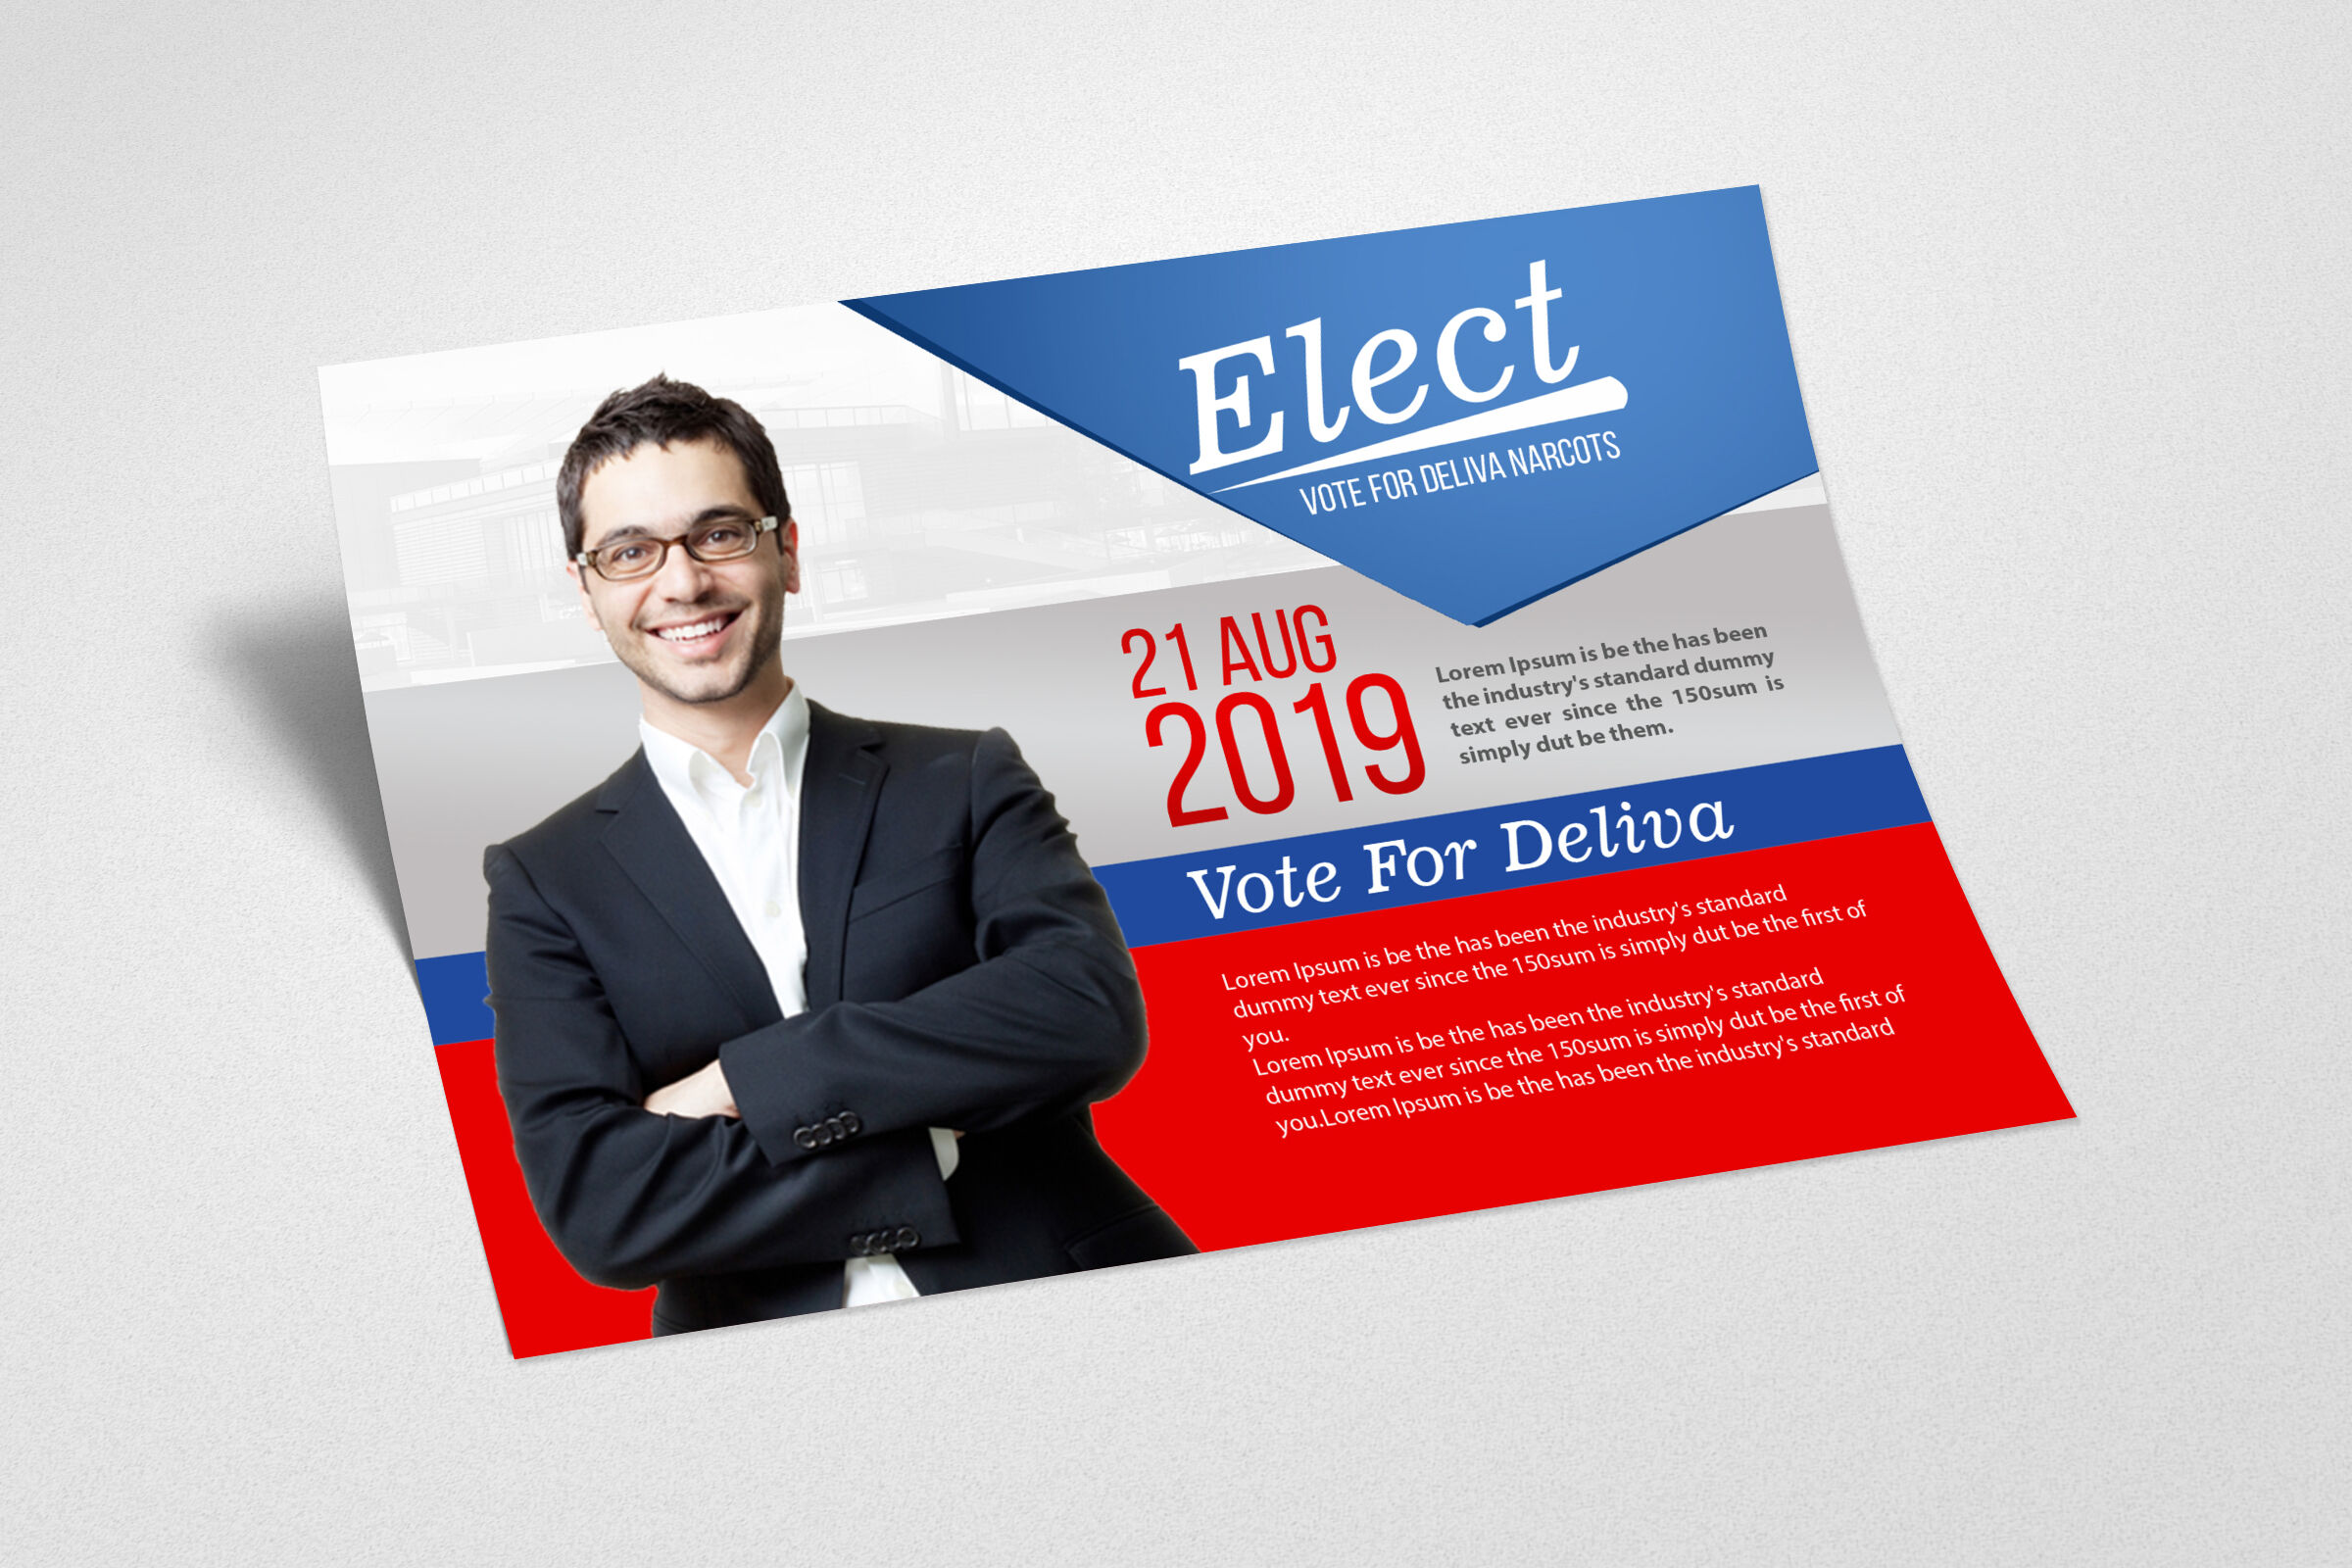 Election Voting Flyer Template By Designhub  TheHungryJPEG.com Throughout Election Templates Flyers